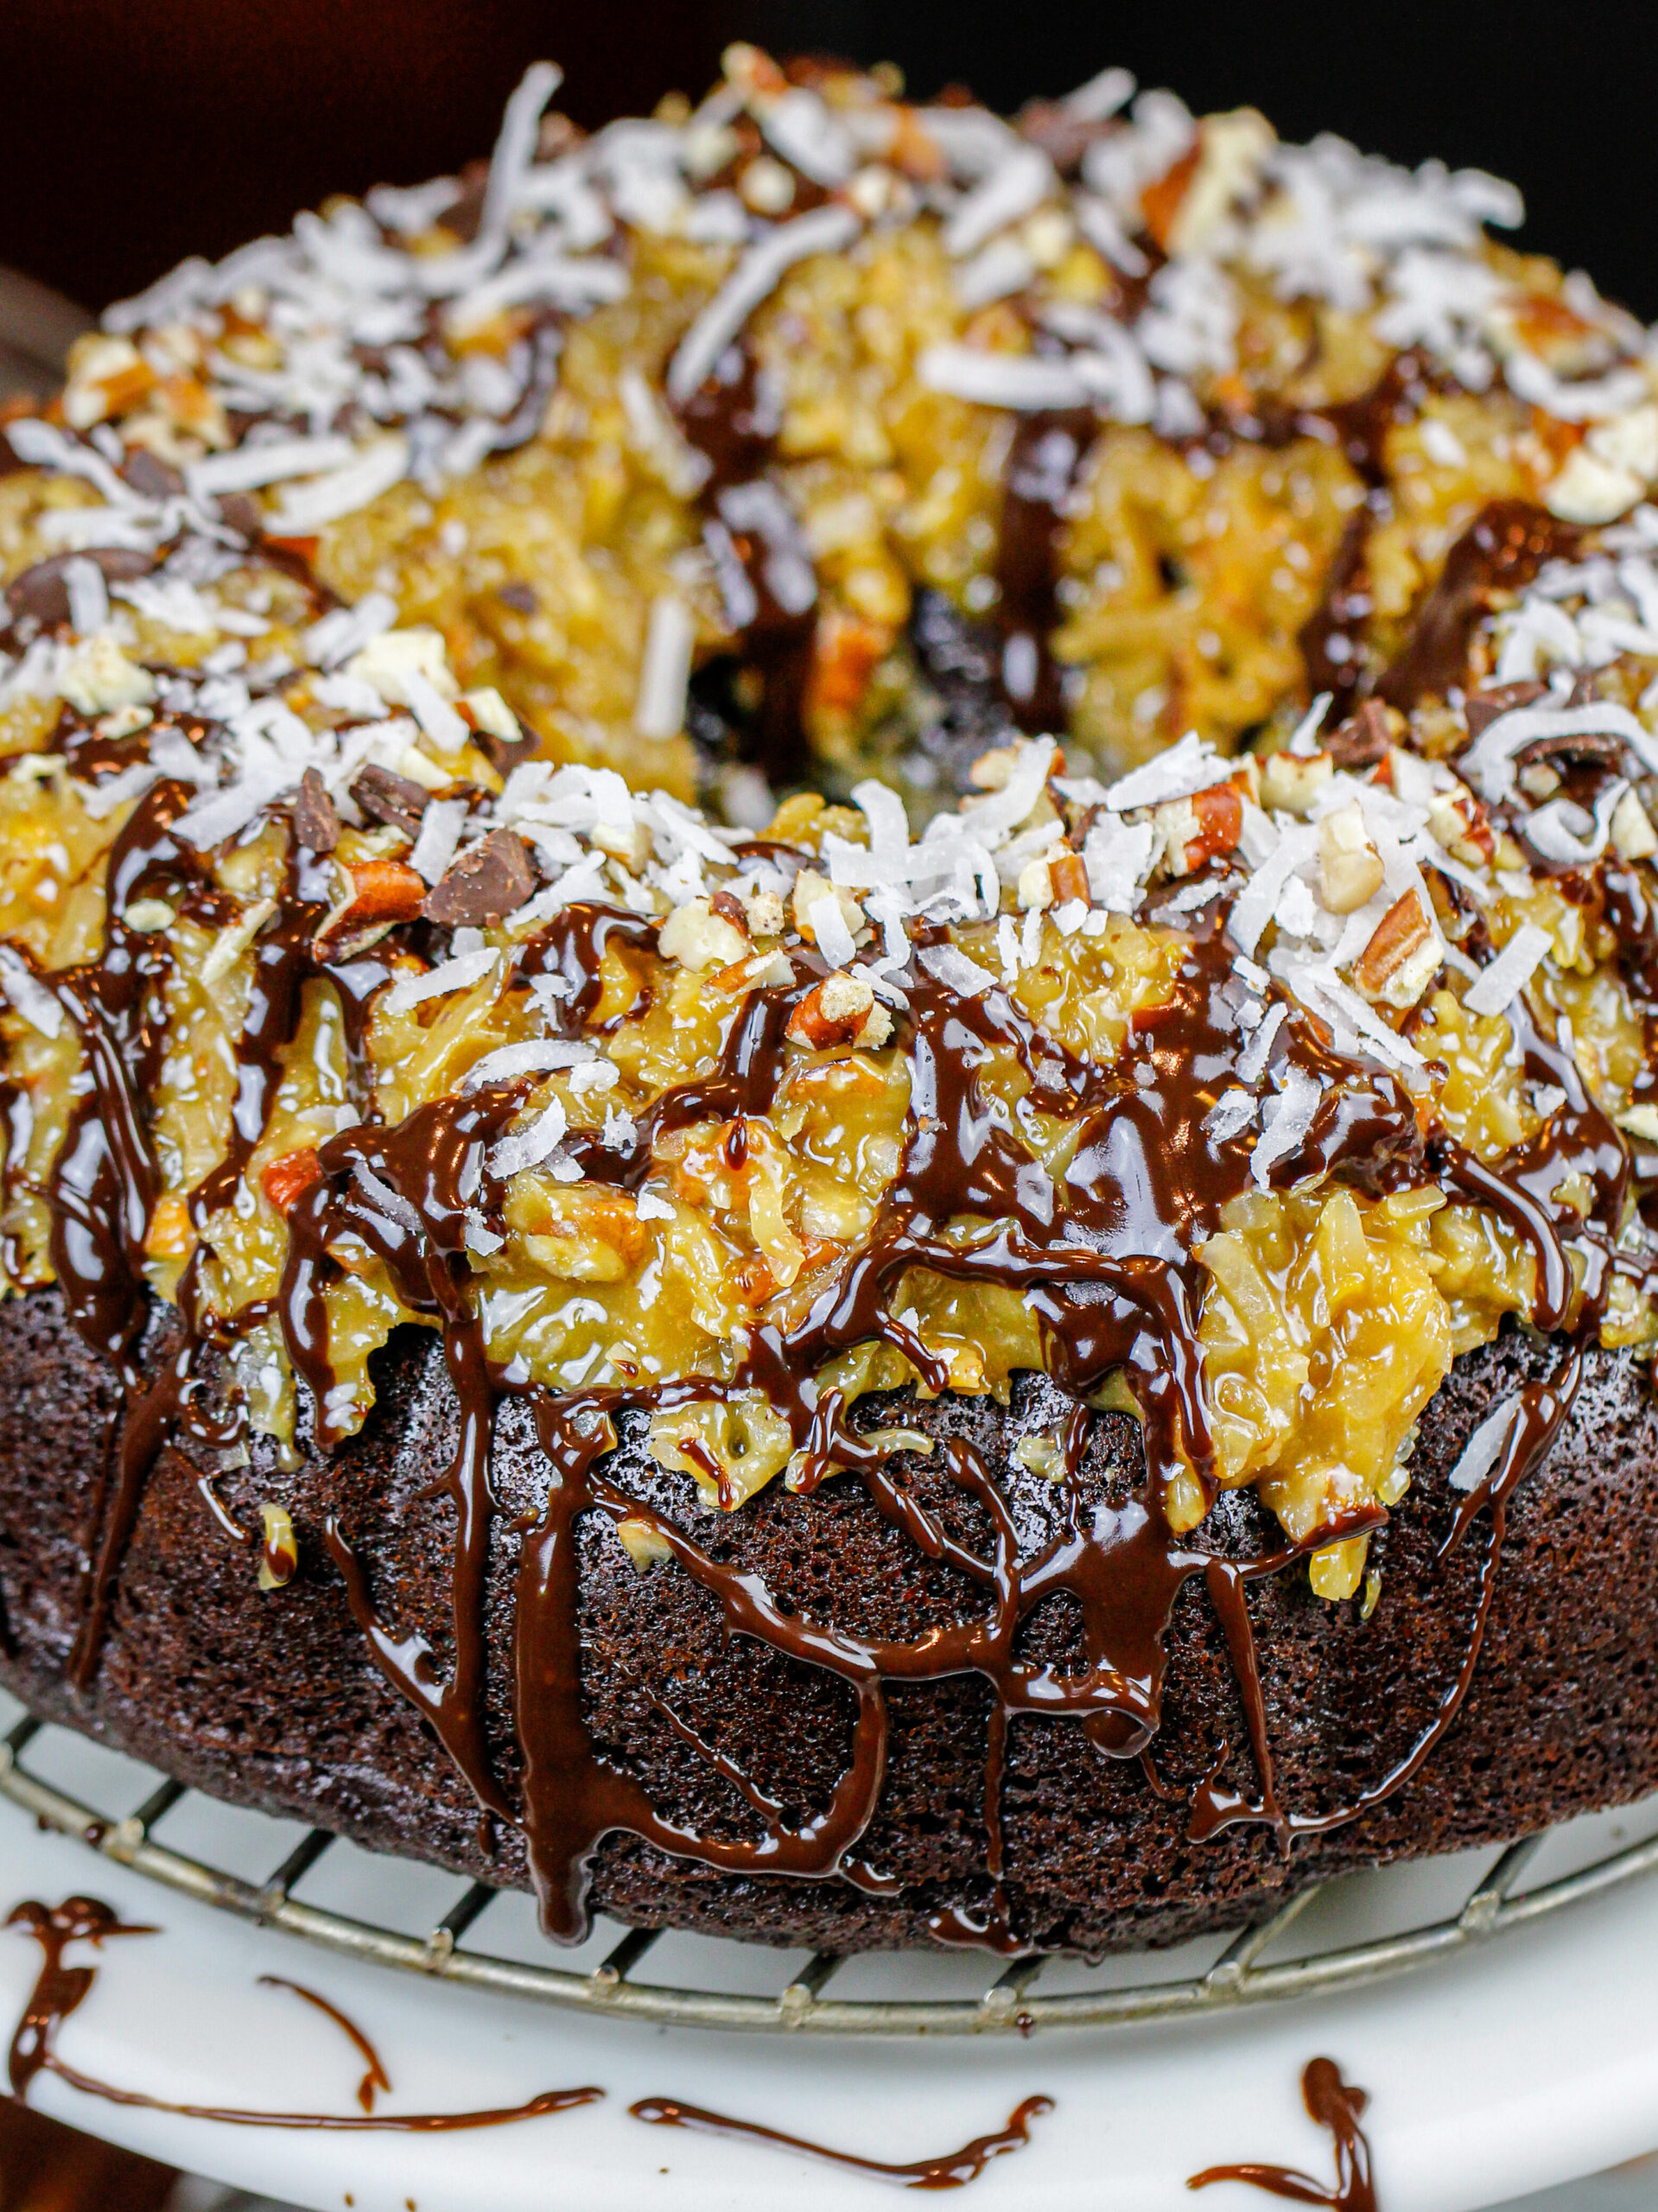 image of a german chocolate bundt cake drizzled with chocolate ganache